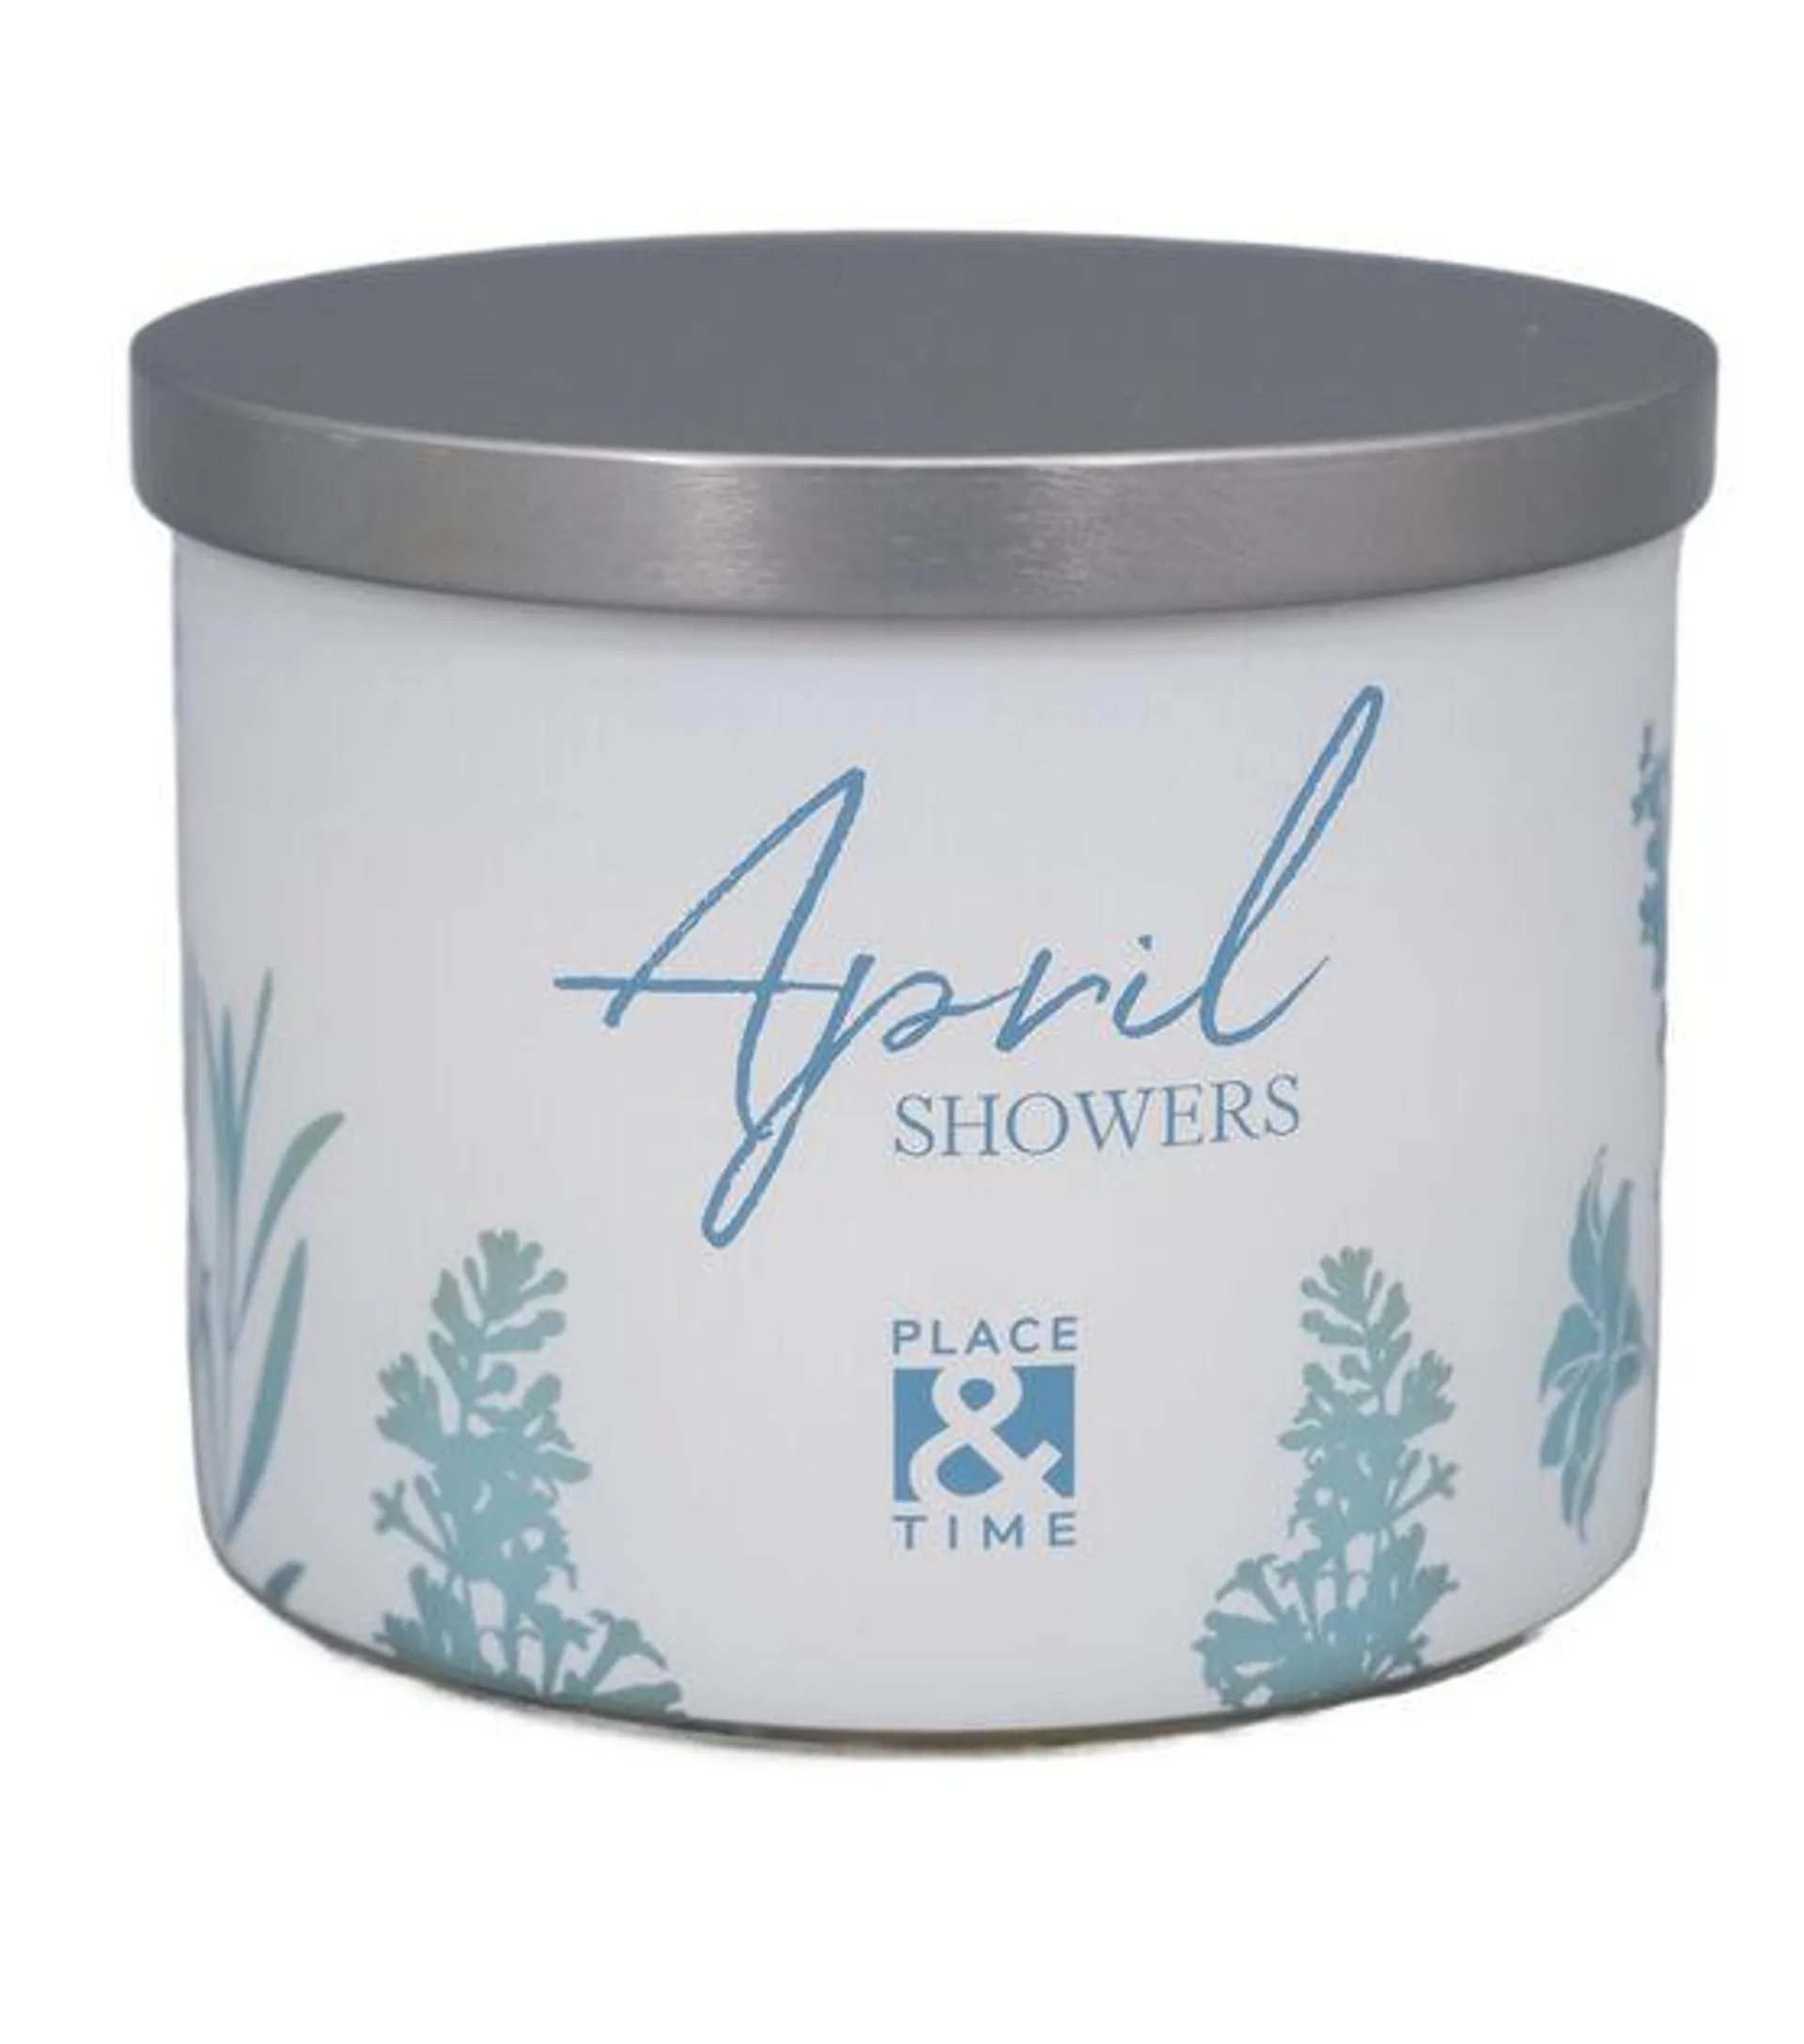 Place & Time 14oz 3-wick April Showers Scented Jar Candle